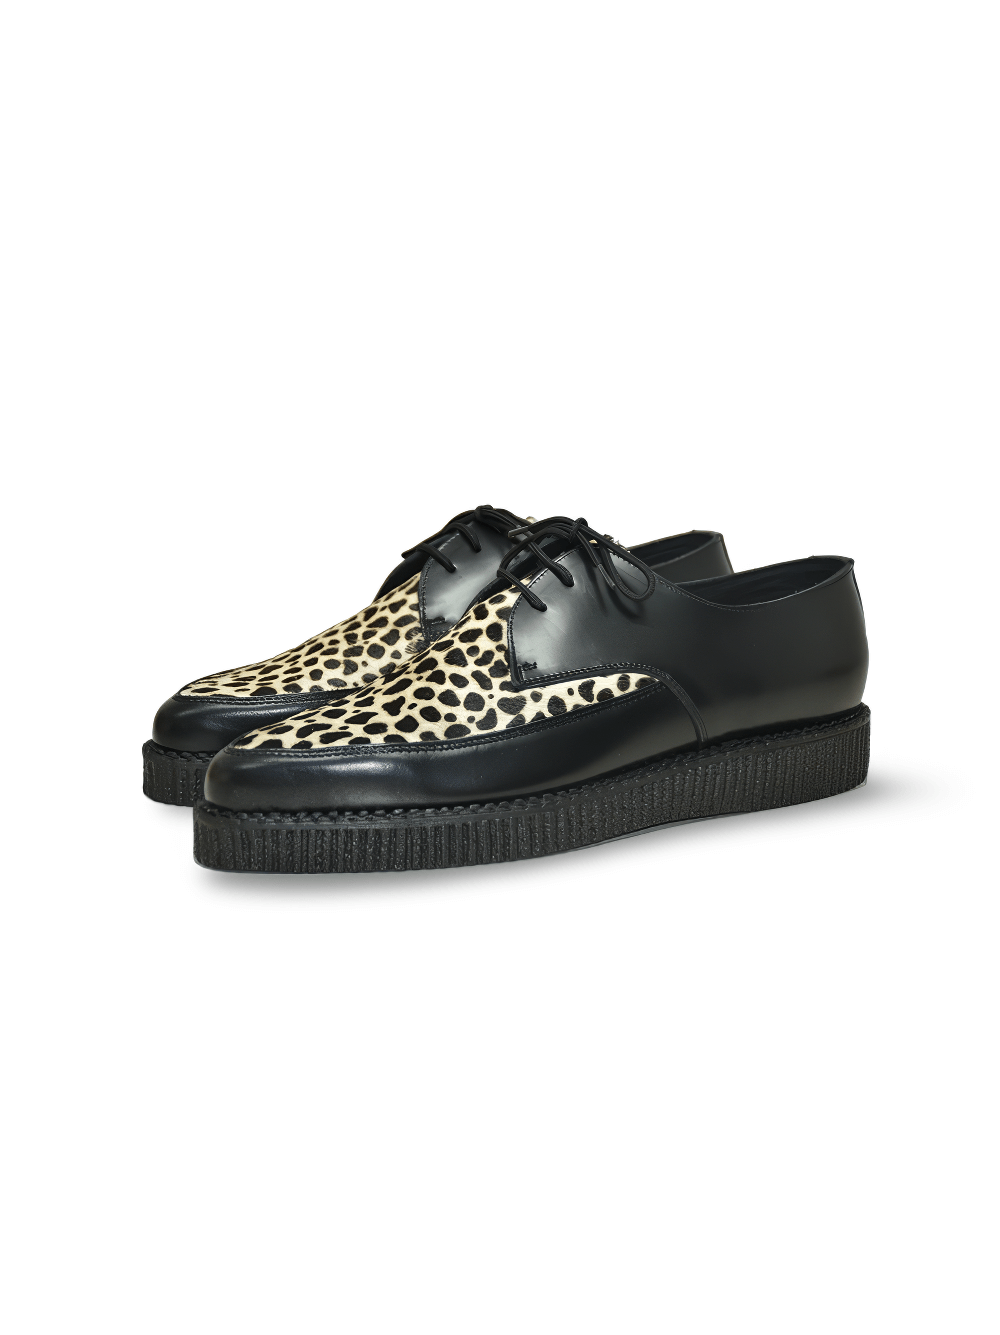 Distinctive Leopard Print Pointed Creepers Shoes in Fur